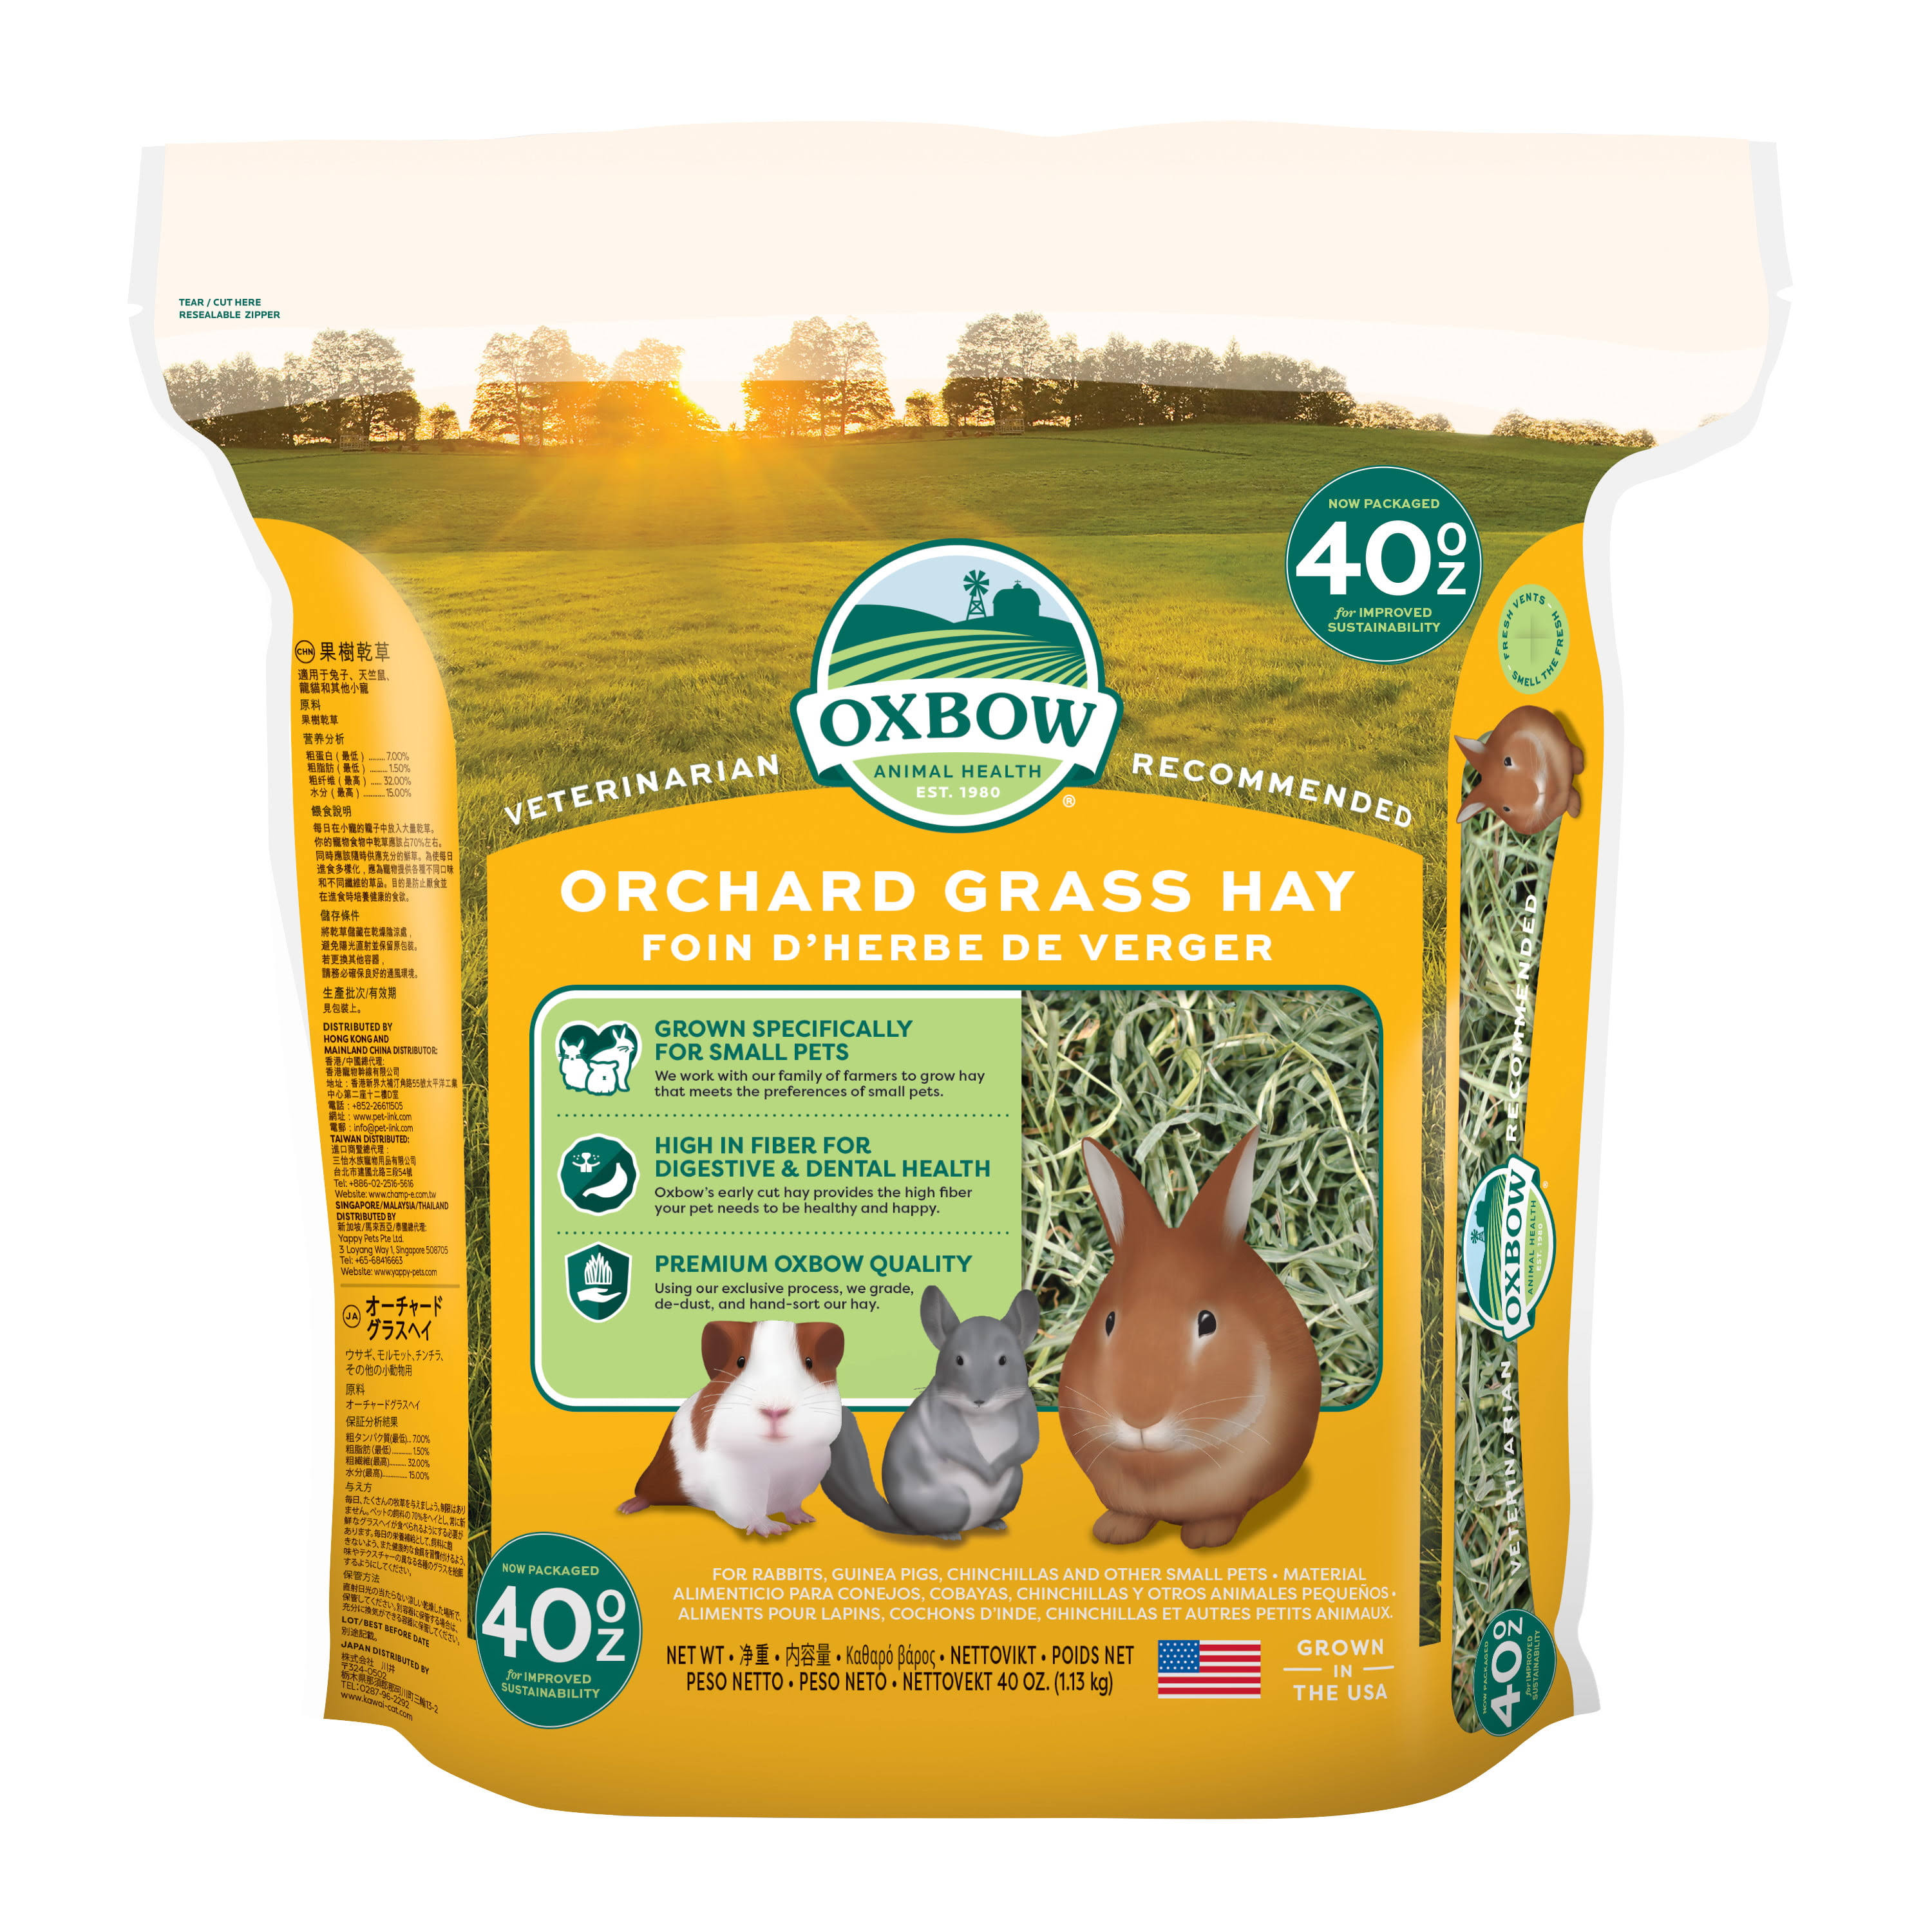 Oxbow Animal Health Orchard Grass Hay for Pets - 40oz